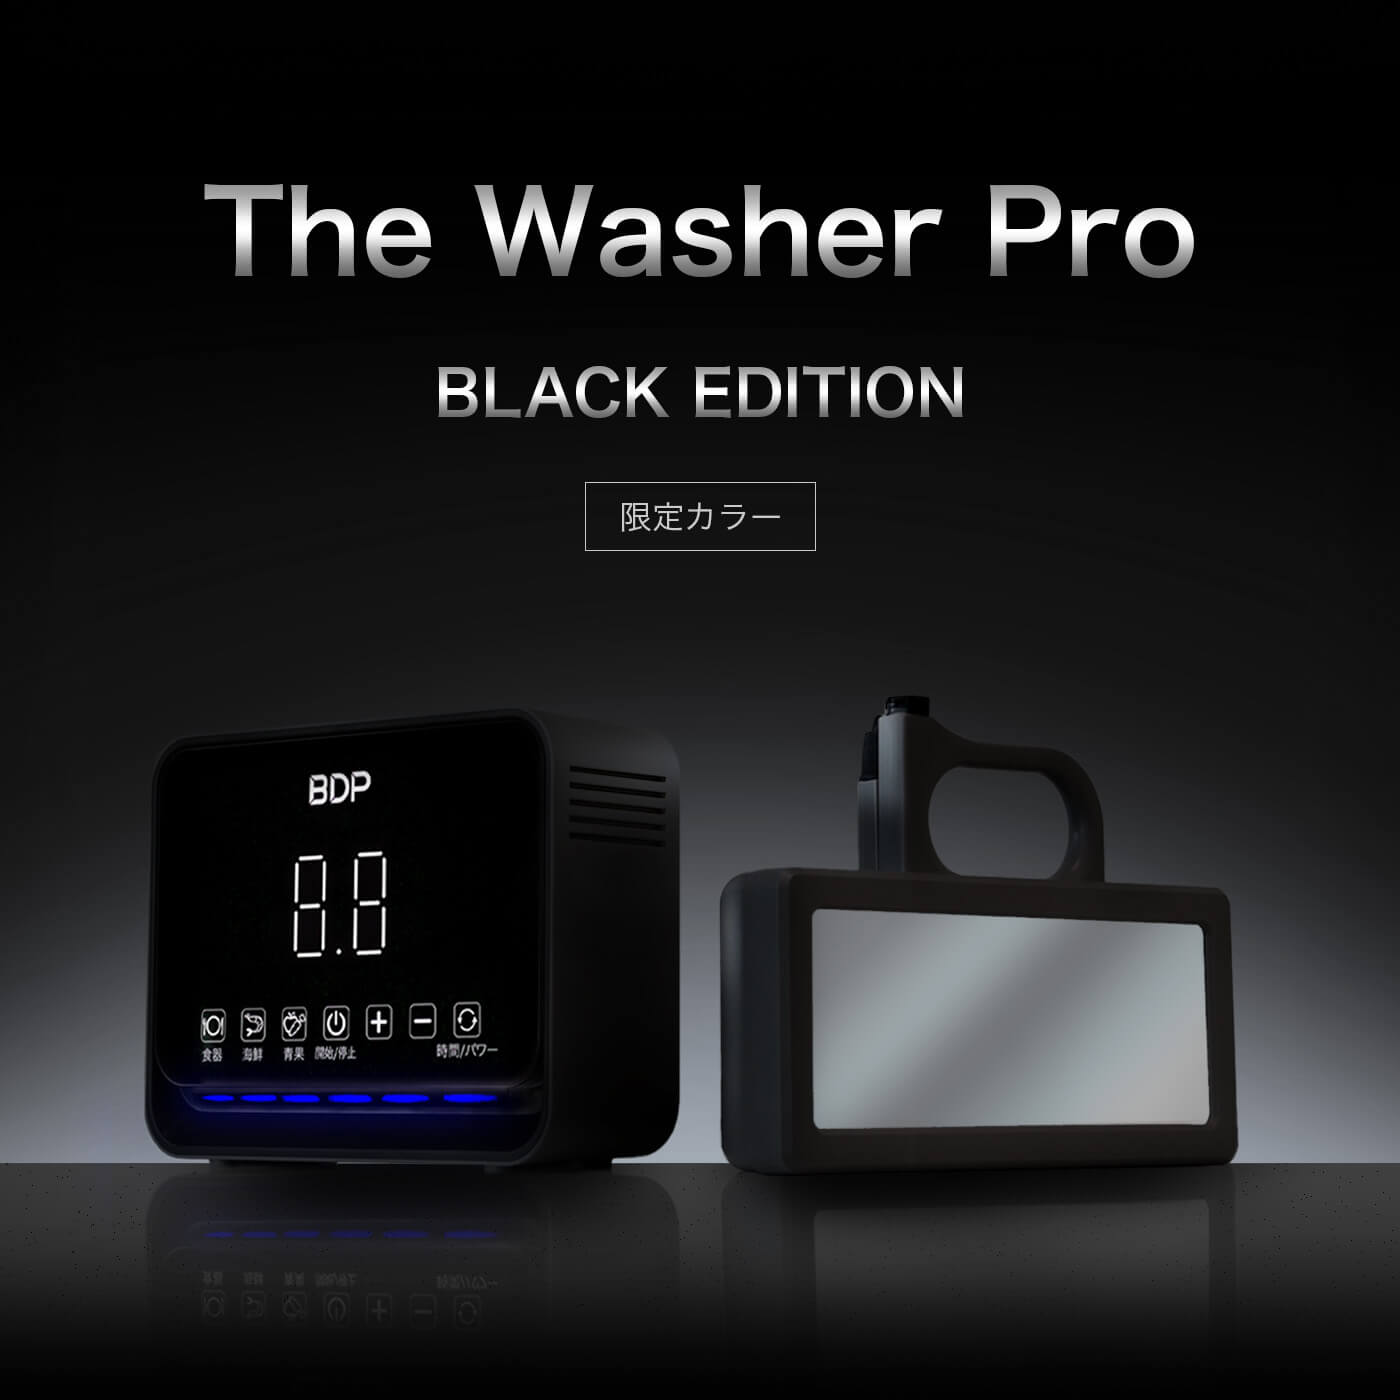 BDP工事不要、究極に場所を取らない超音波食洗機 | The Washer Pro